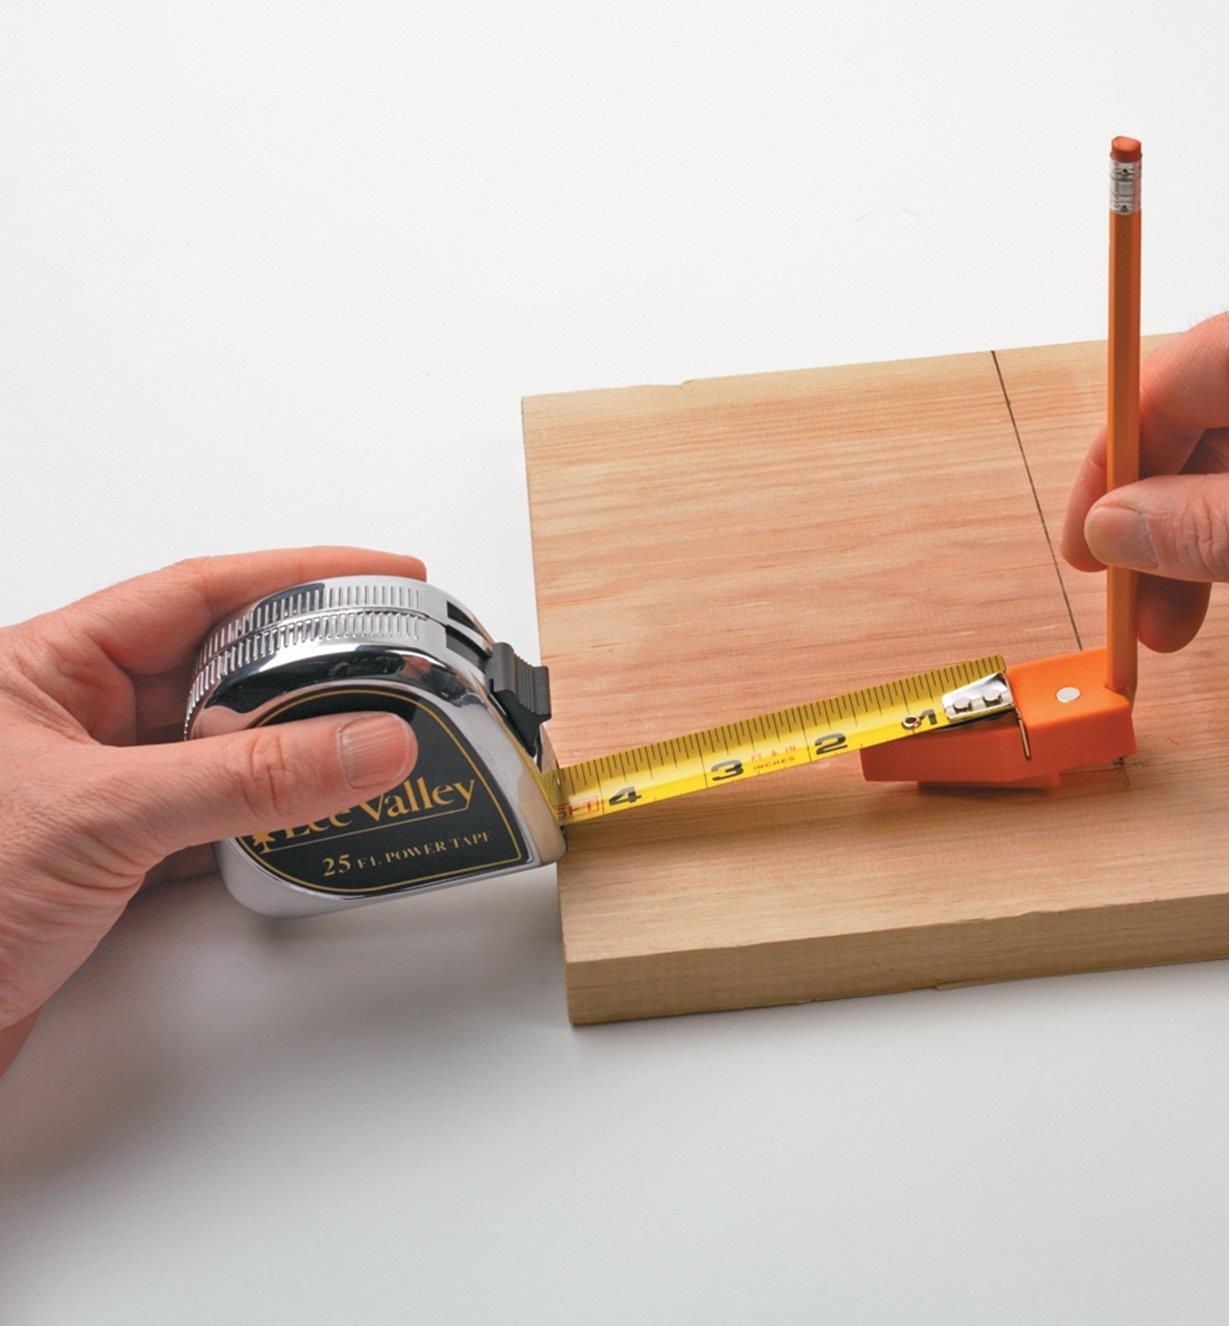 Marking a line across a board using a tape measure and tape tip